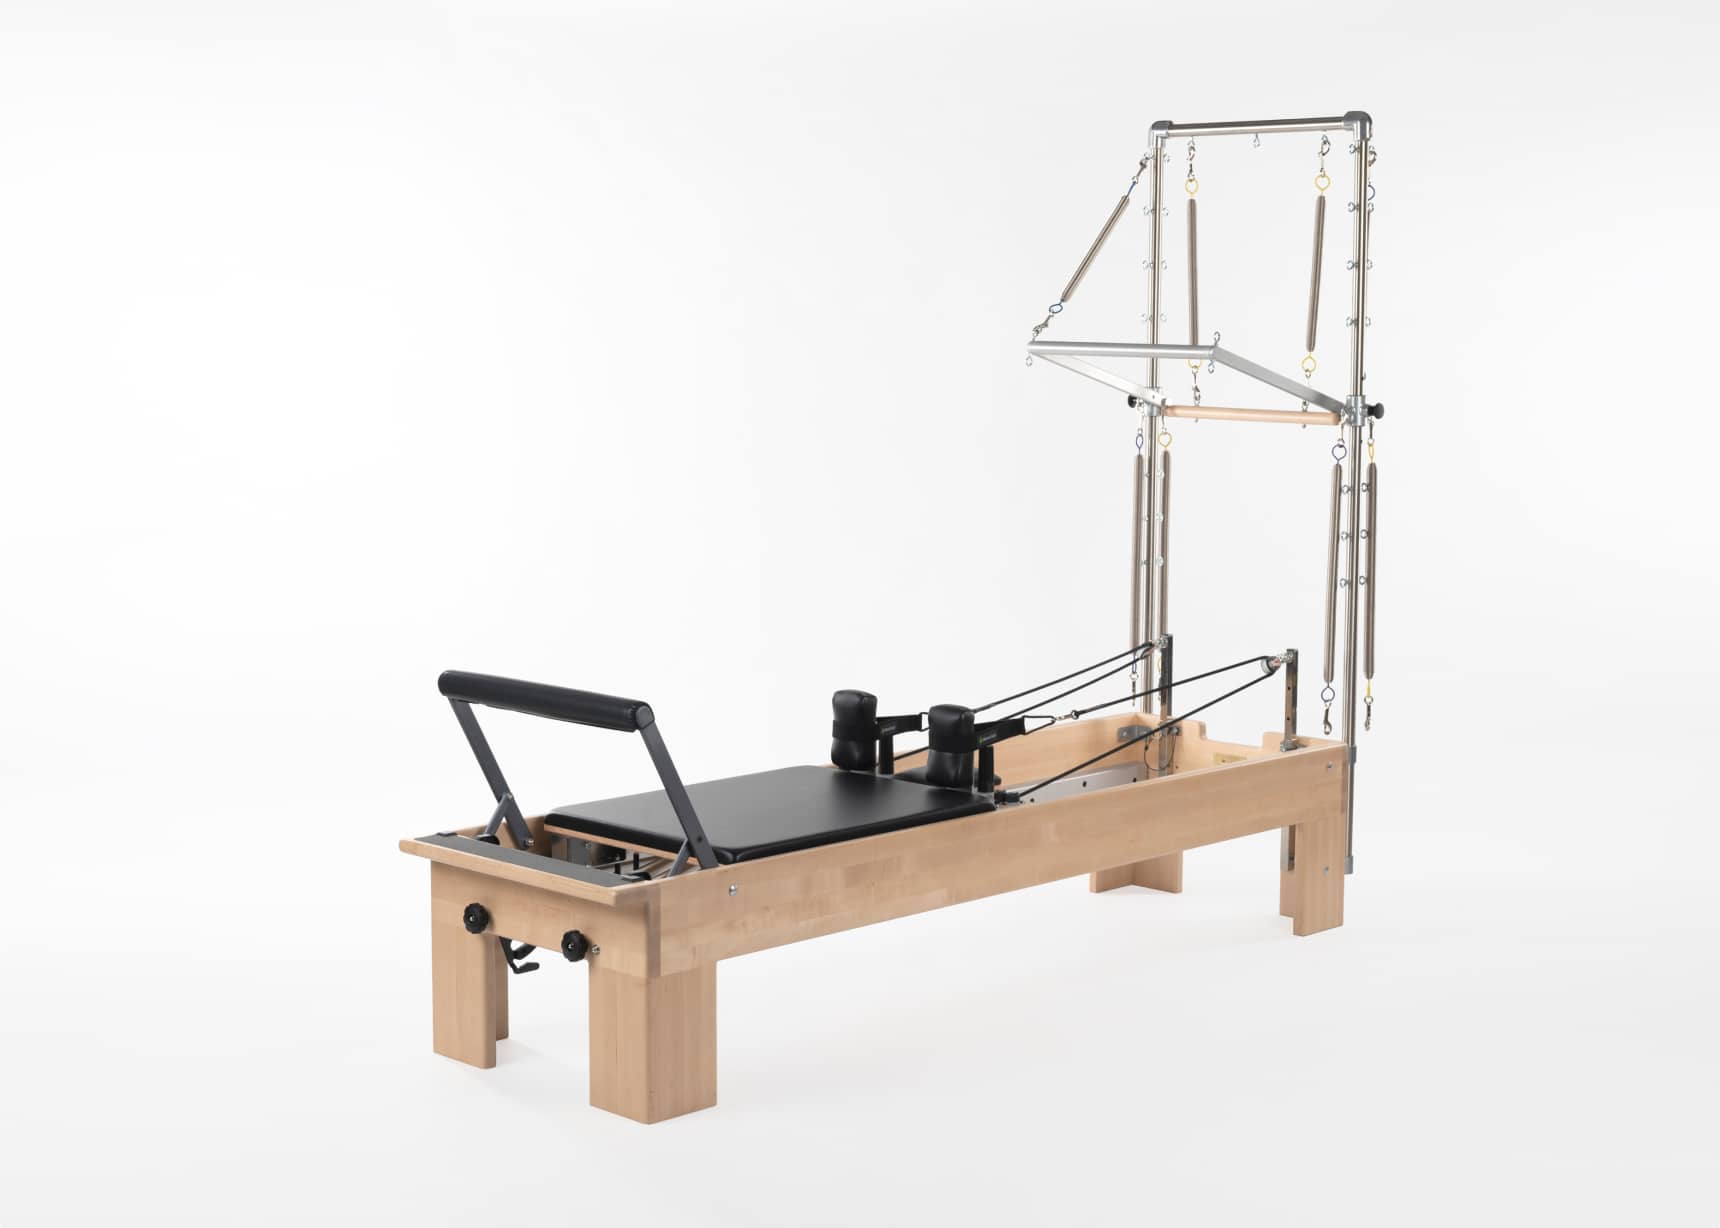 Balanced Body Rialto Pilates Reformer with Tower and Mat Conversion,  Pilates Exercise Equipment, Workout Equipment for Home or Studio, Black  Upholstery in Dubai - UAE